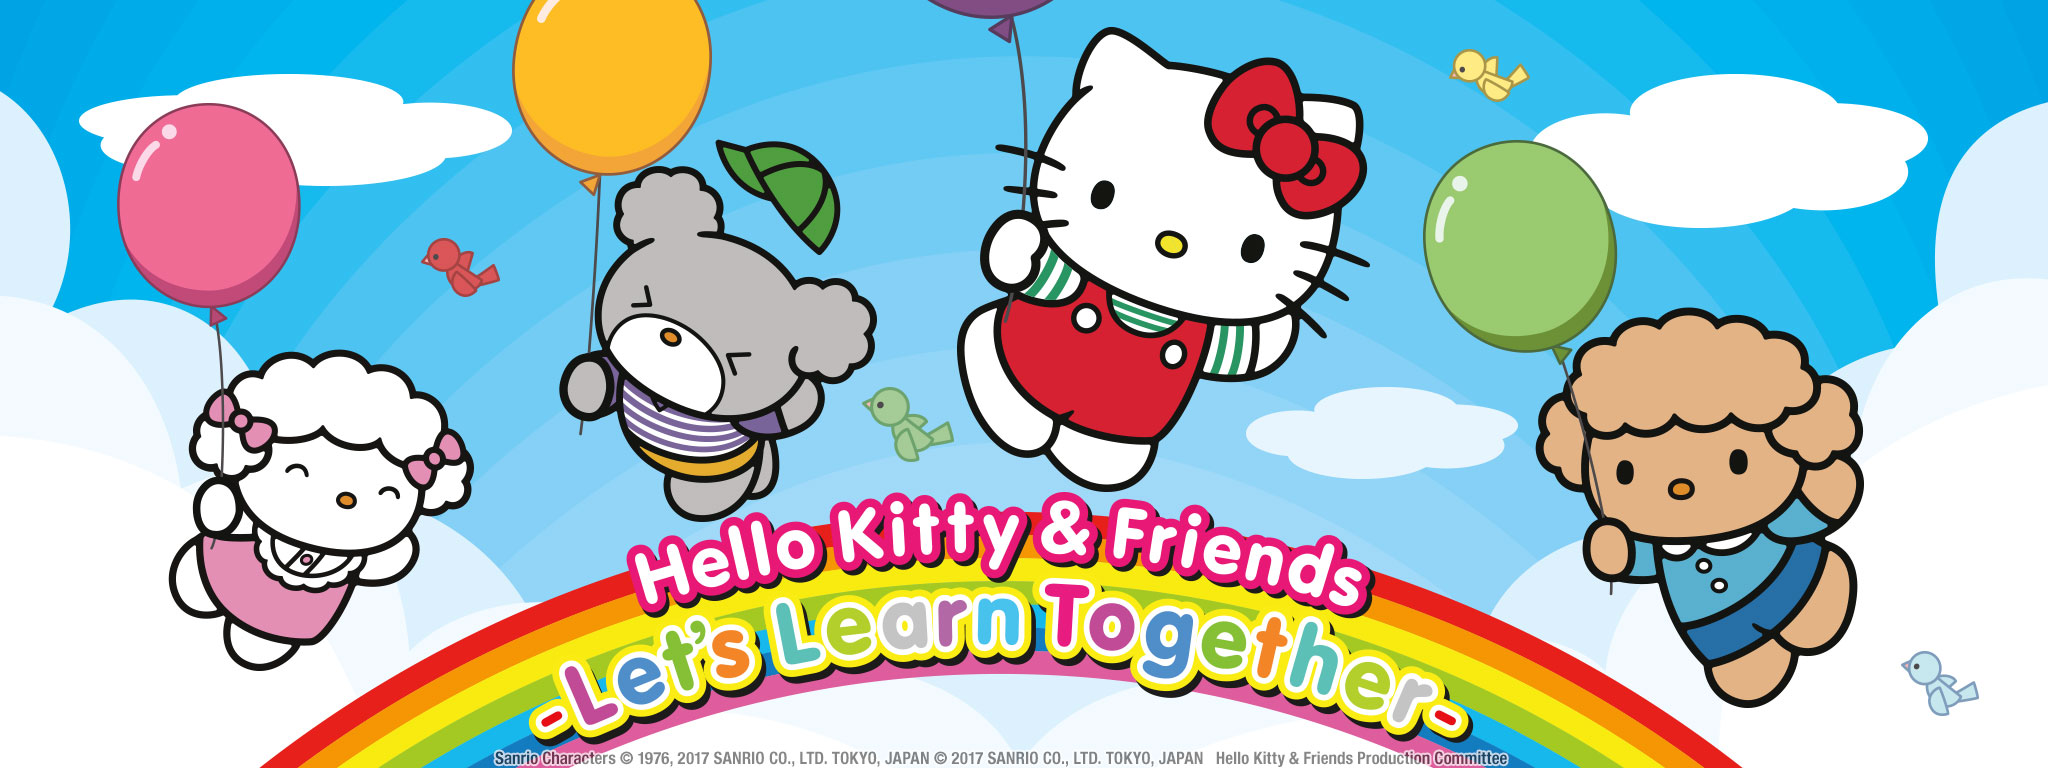 Title Art for Hello Kitty & Friends - Let's Learn Together